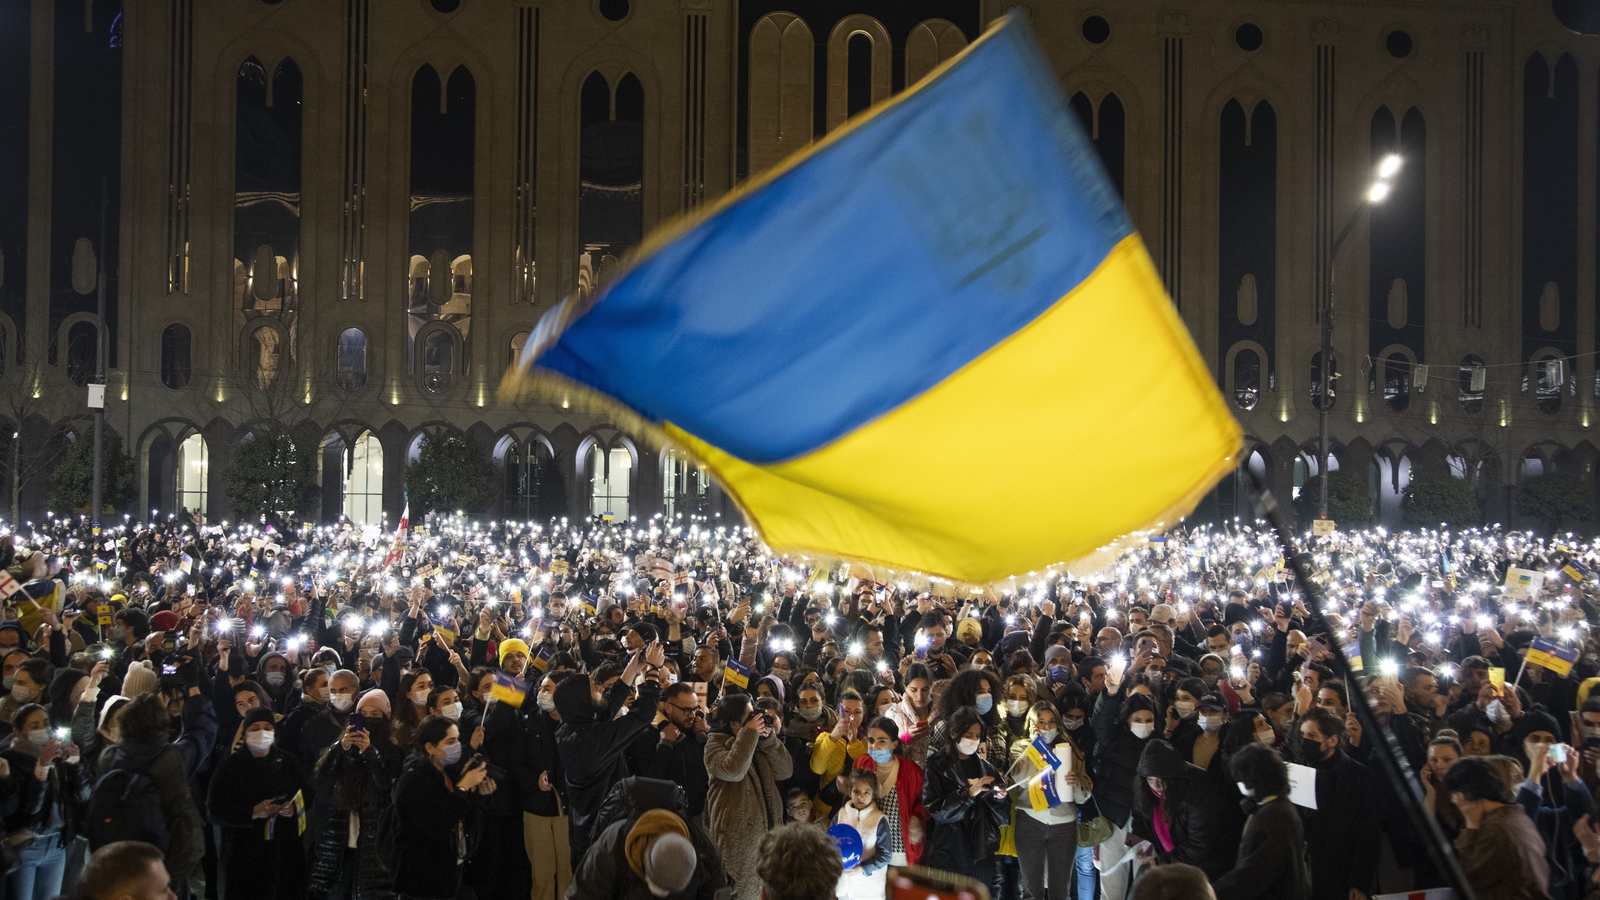 Image - A rally in support of Ukraine in front of the parliament building in Tbilisi, Georgia